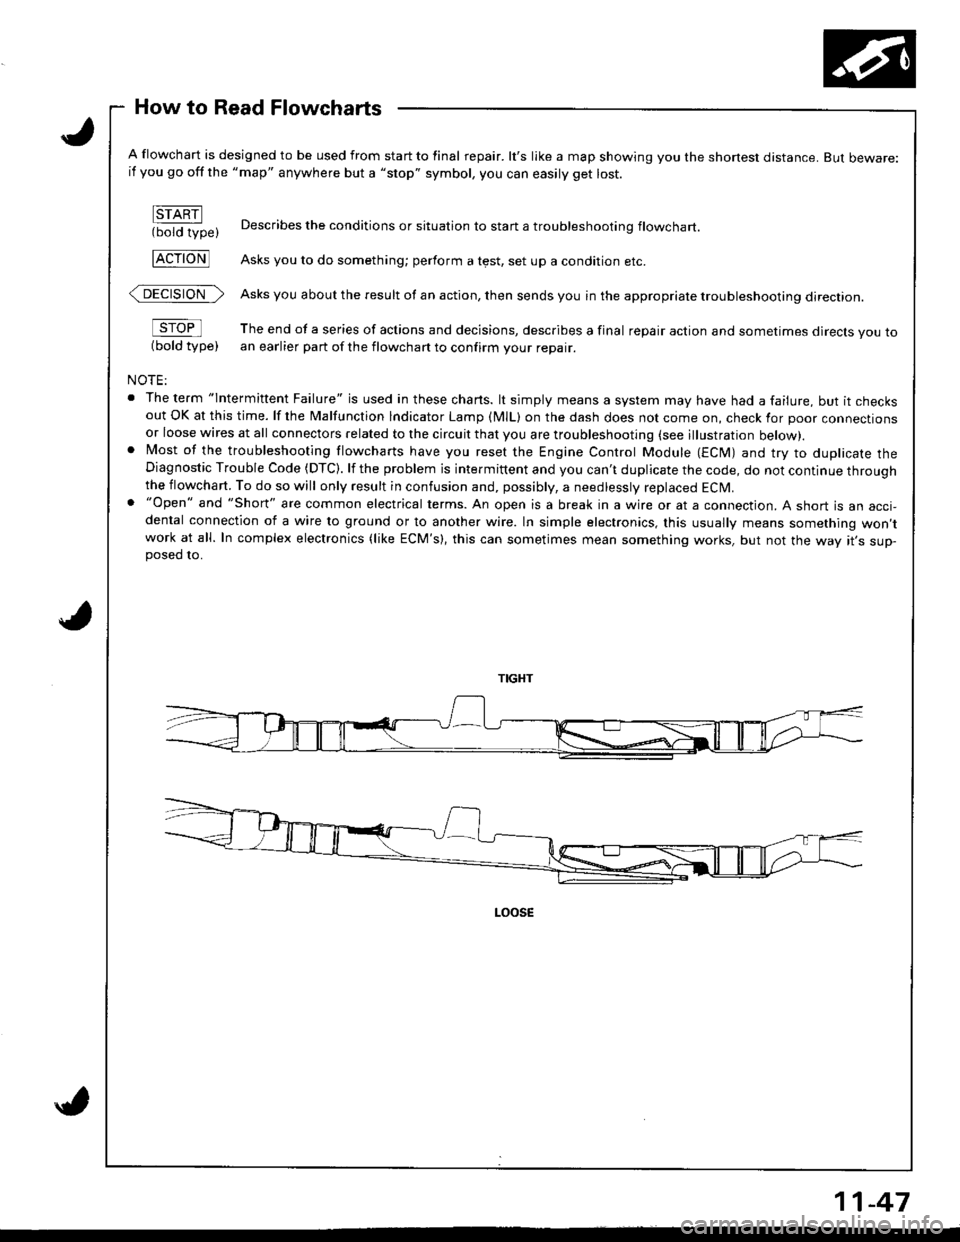 HONDA INTEGRA 1998 4.G Workshop Manual How to Read Flowcharts
A flowchart is designed to be used from start to final repair. lts like a map showing you the shone$ distance. But beware:if you go off the "map" anywhere but a "stop" symbol, 